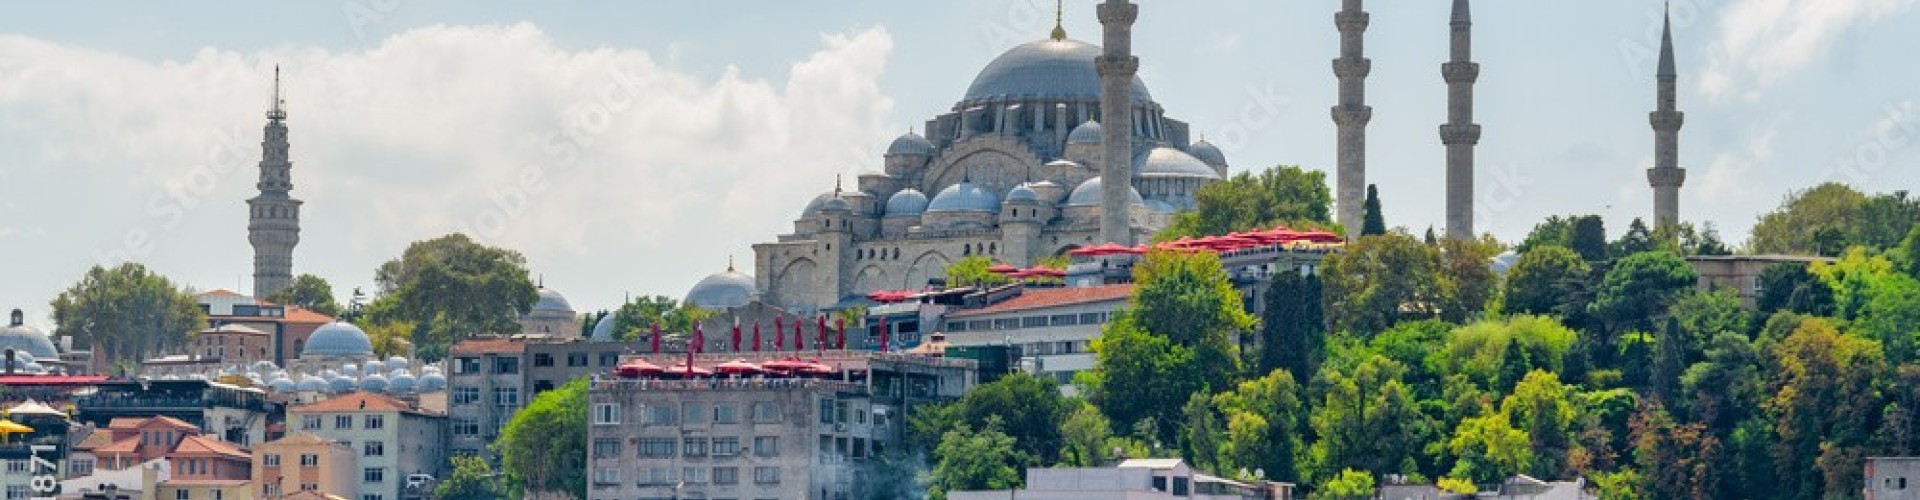 9～10 DAYS TOUR FROM ISTANBUL